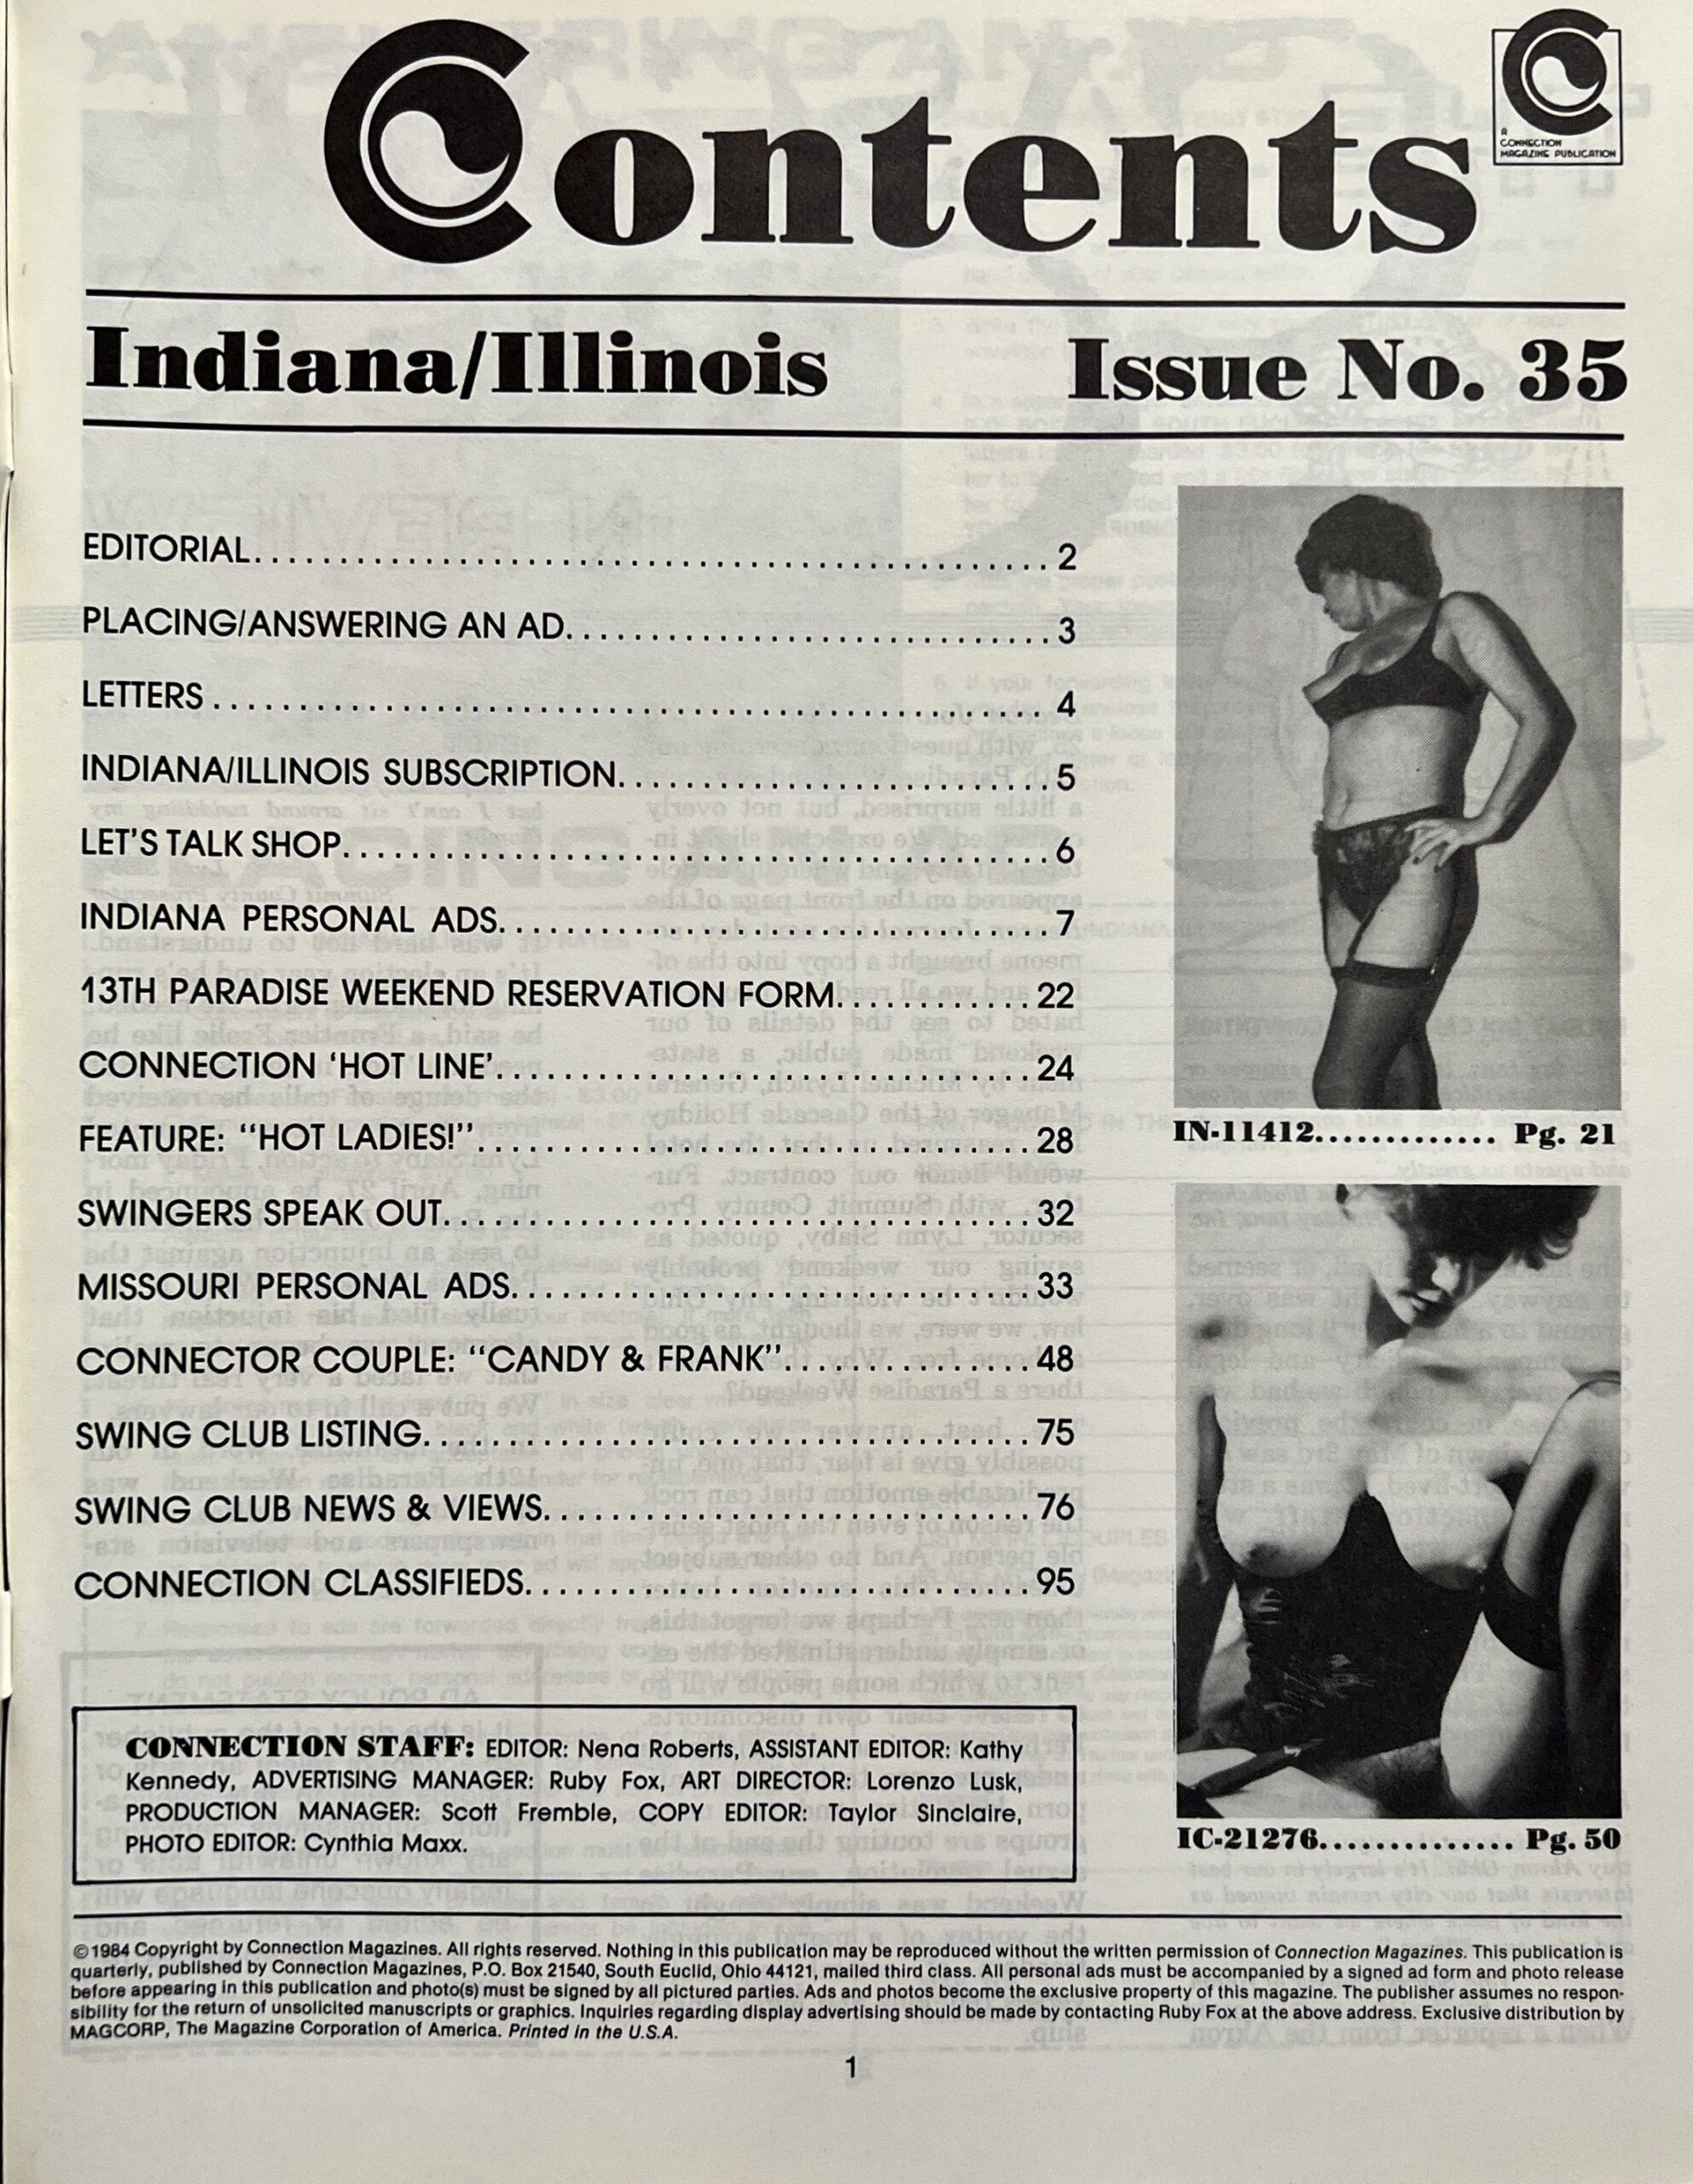 Indiana Illinois Connection #34 1984 Adult Personals-Swingers-Contatcts Magazine